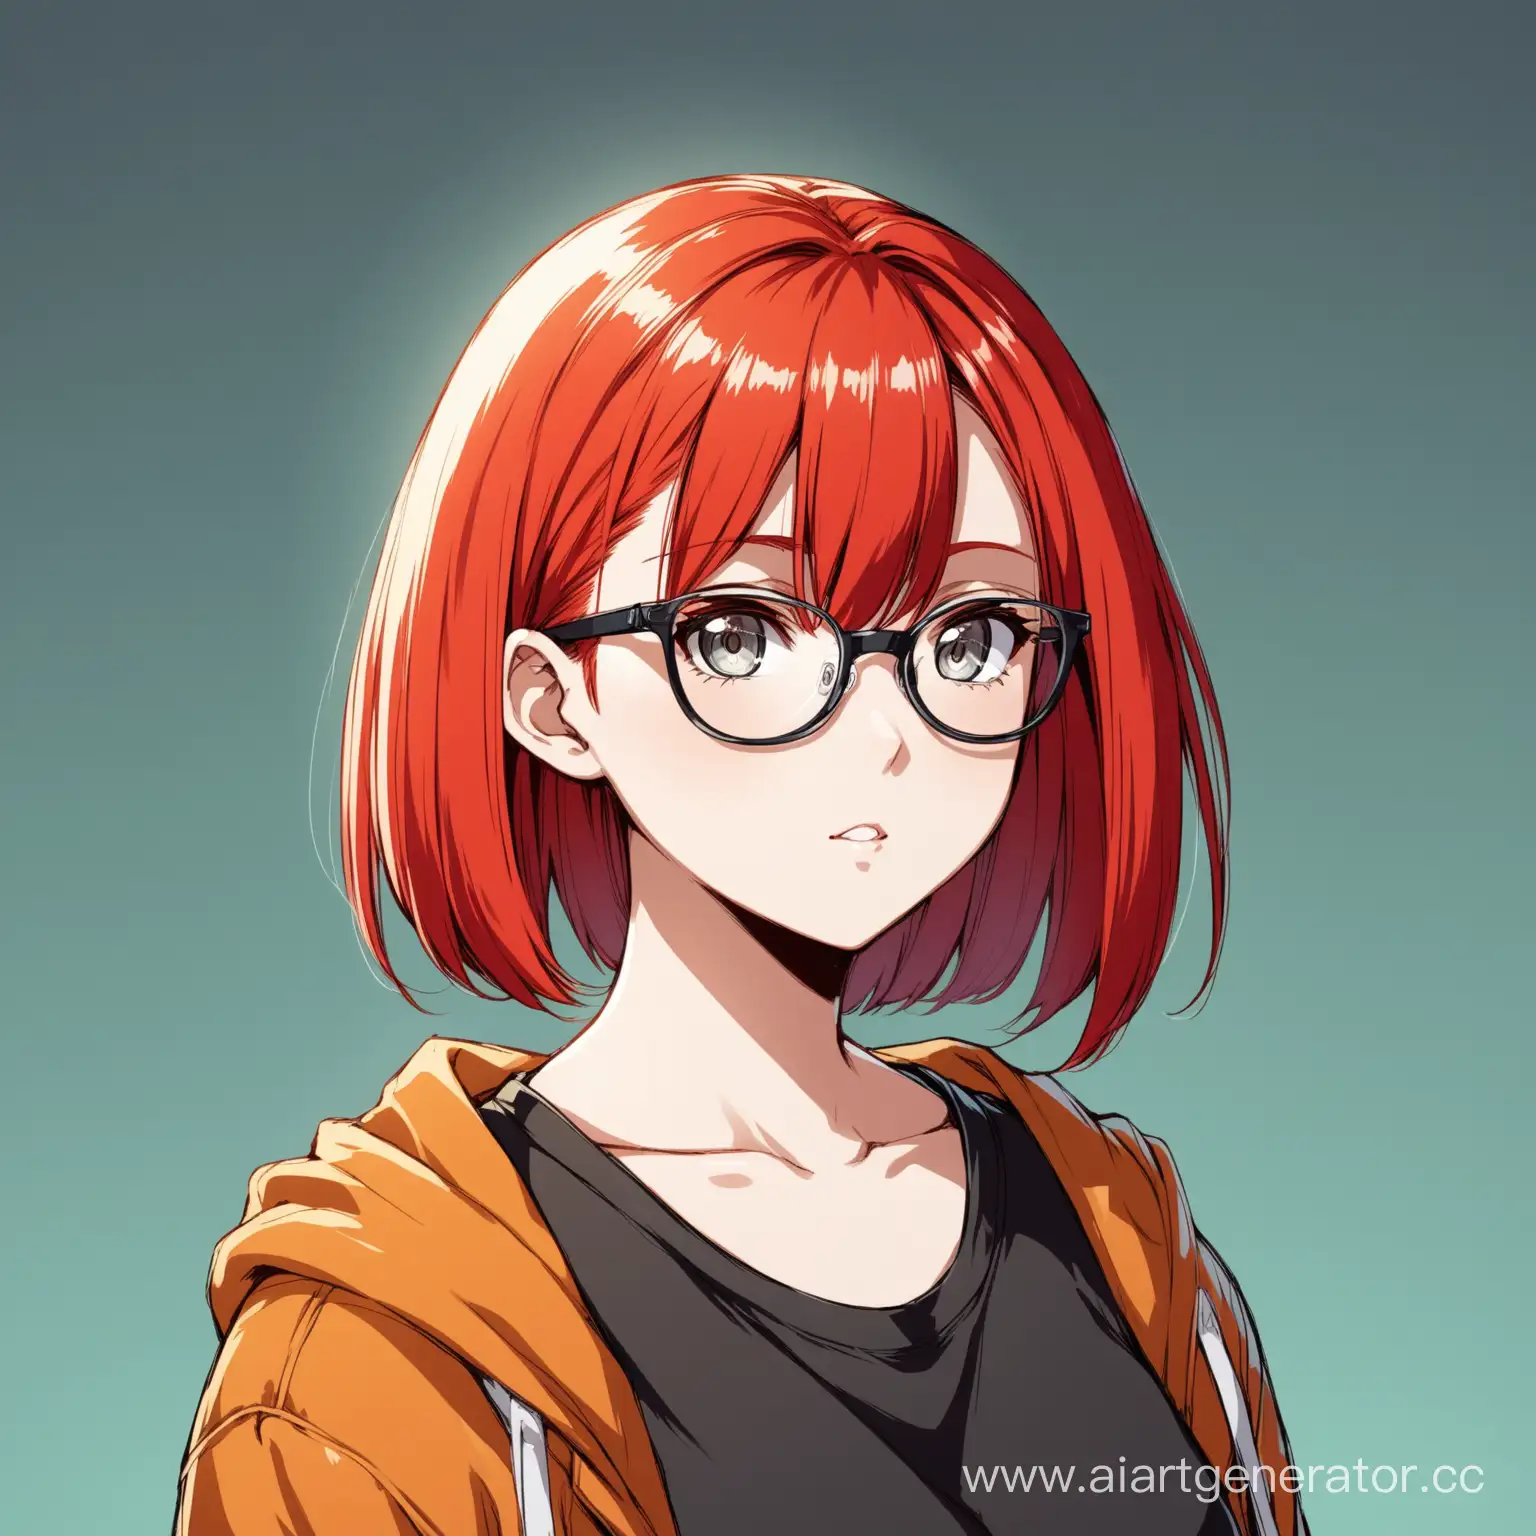 Anime-Style-Teen-with-Bold-Red-Hair-and-Glasses